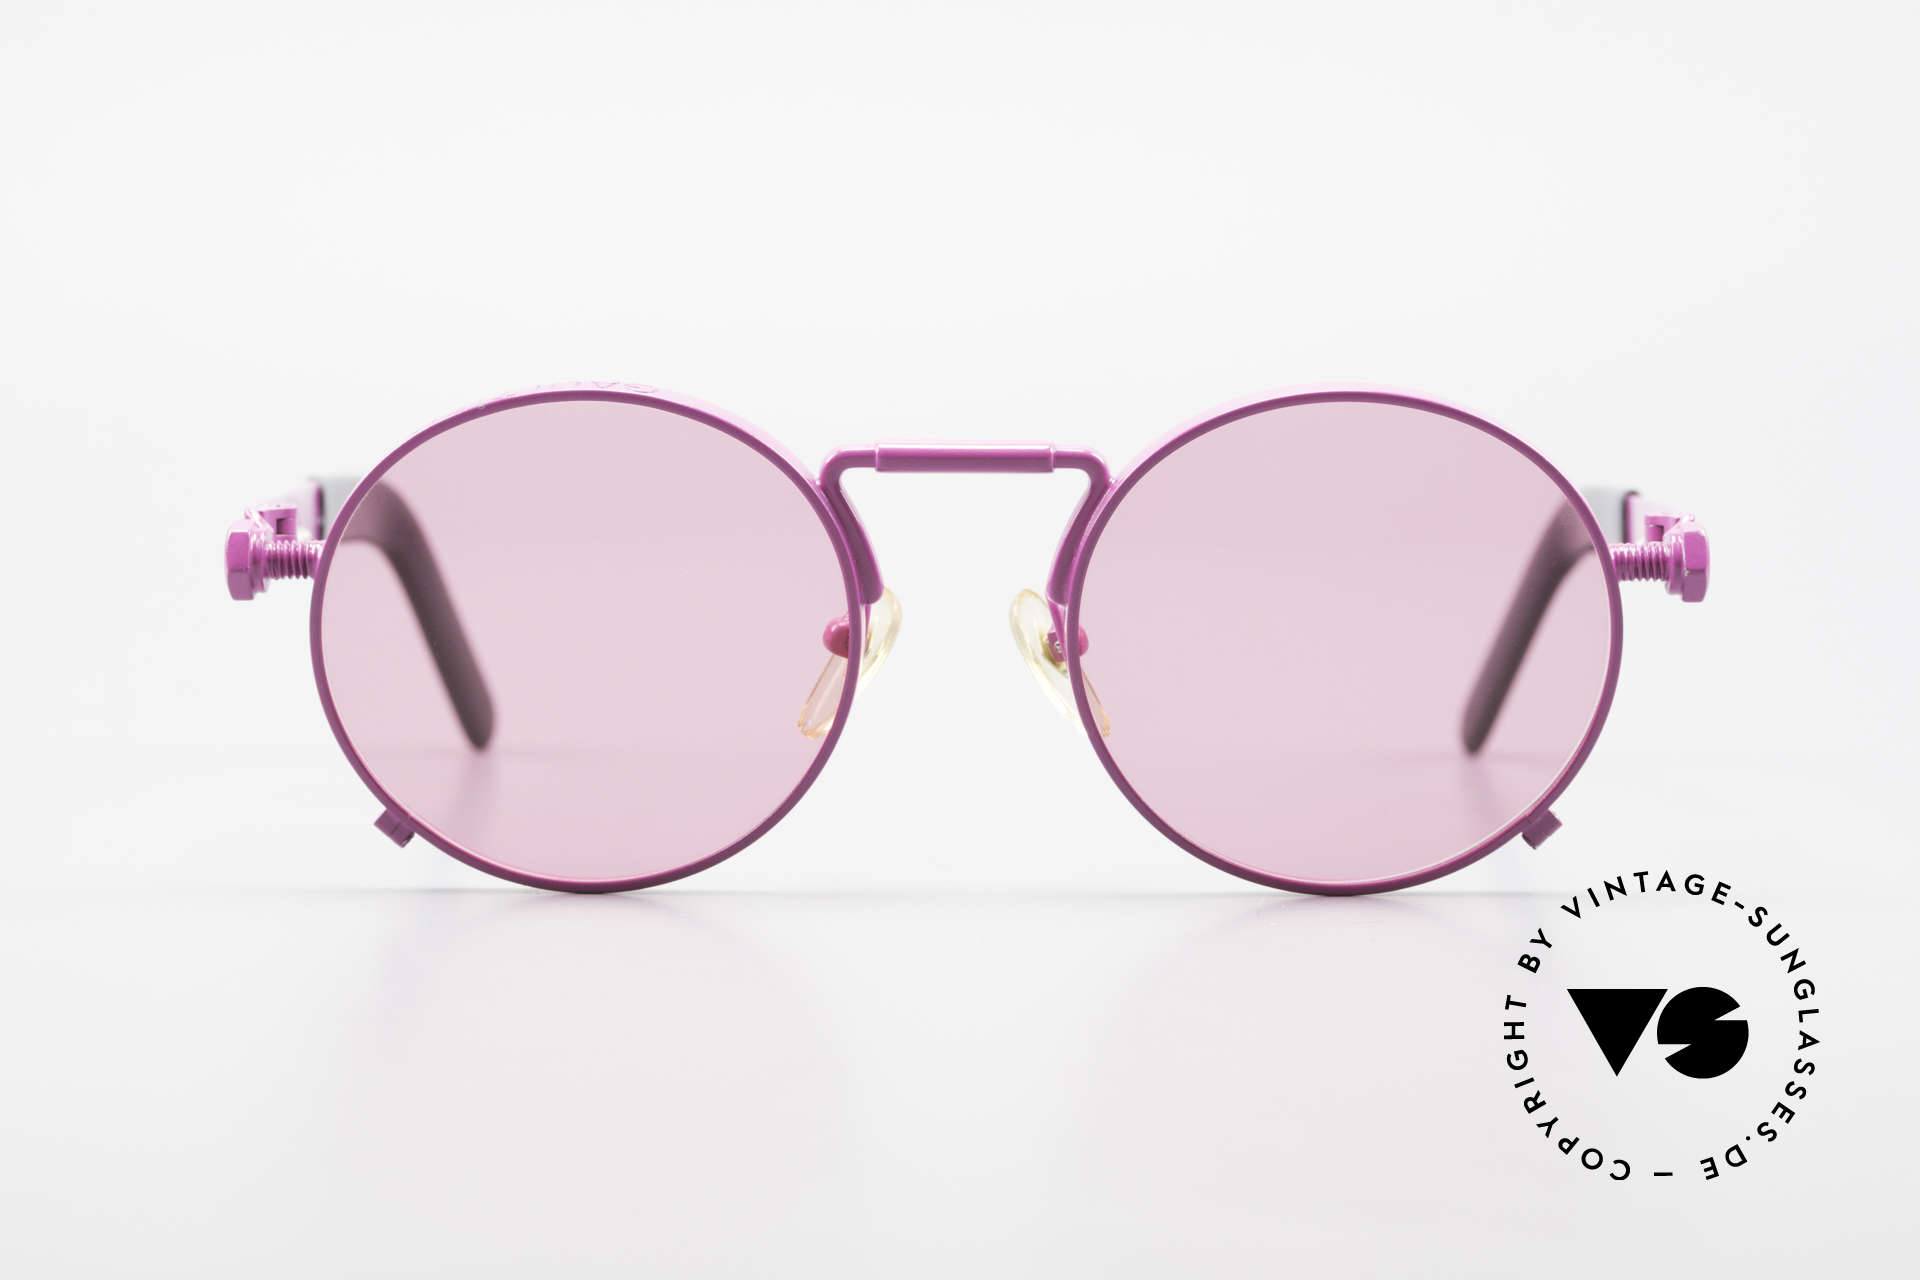 Jean Paul Gaultier 56-8171 Customized Pink Edition, 1st model of the Gaultier eyewear collection from 1991, Made for Men and Women